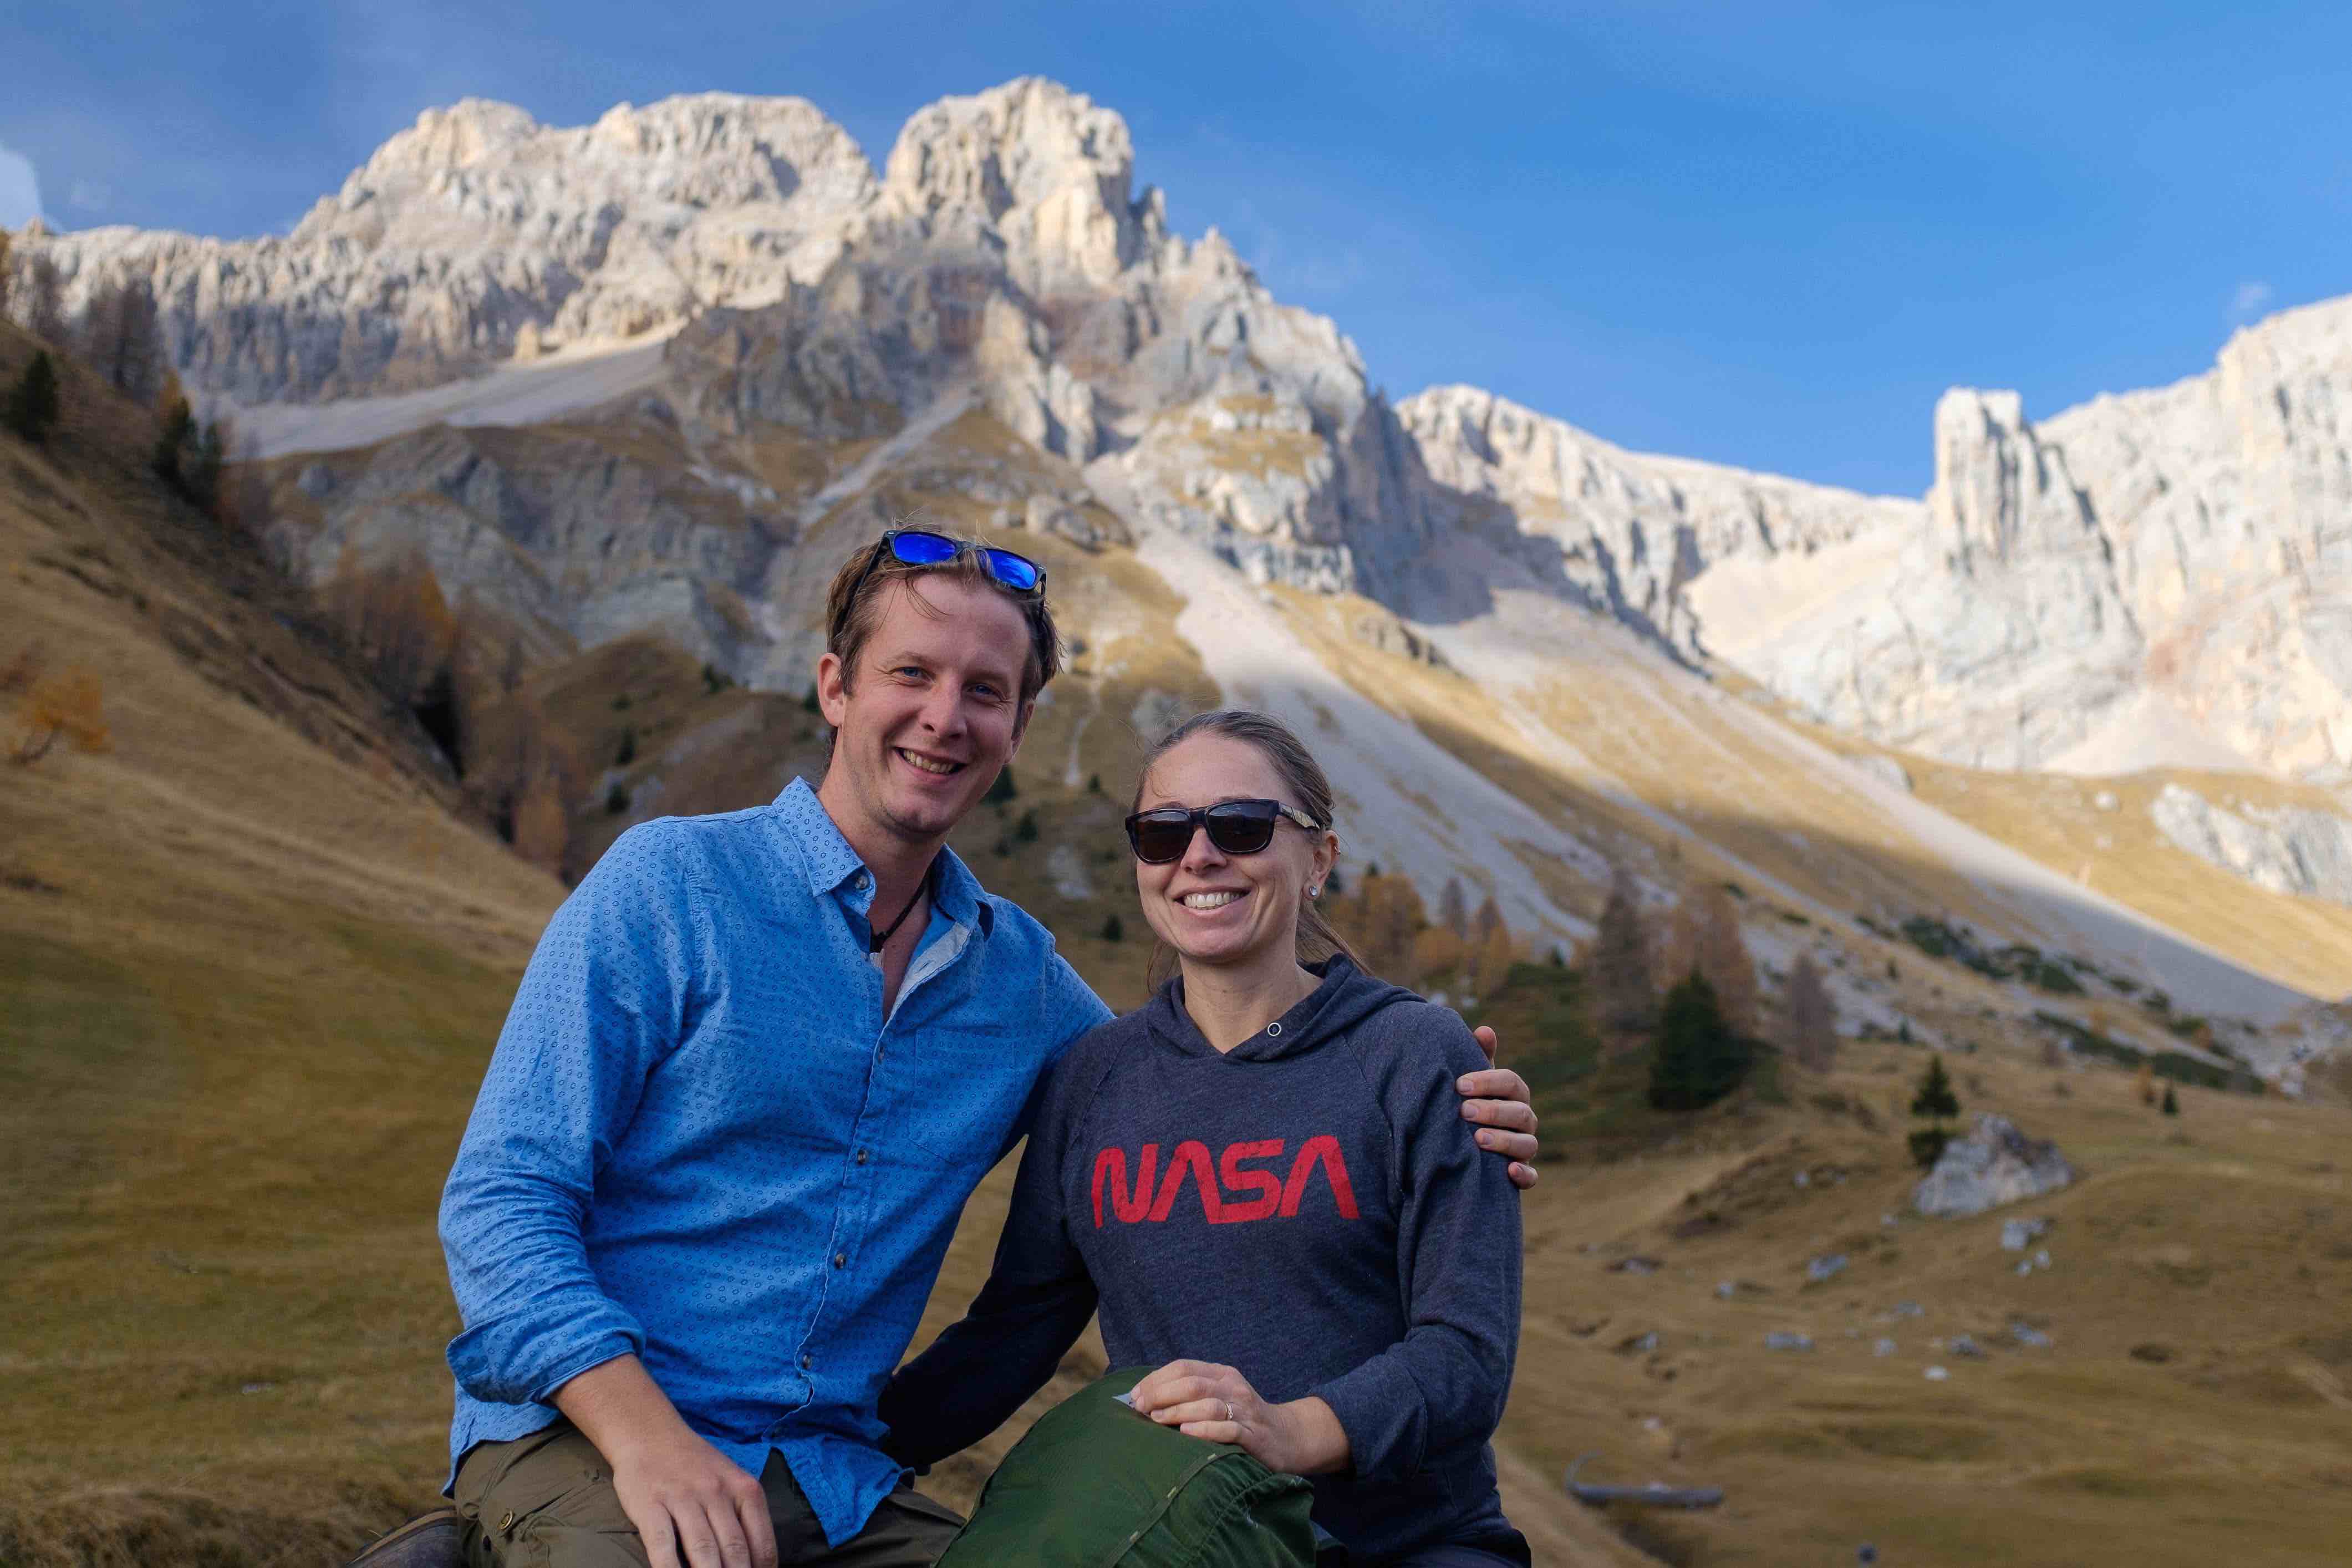 photo of a white man and woman smiling, wearing hiking clothes with mountain peaks behind them